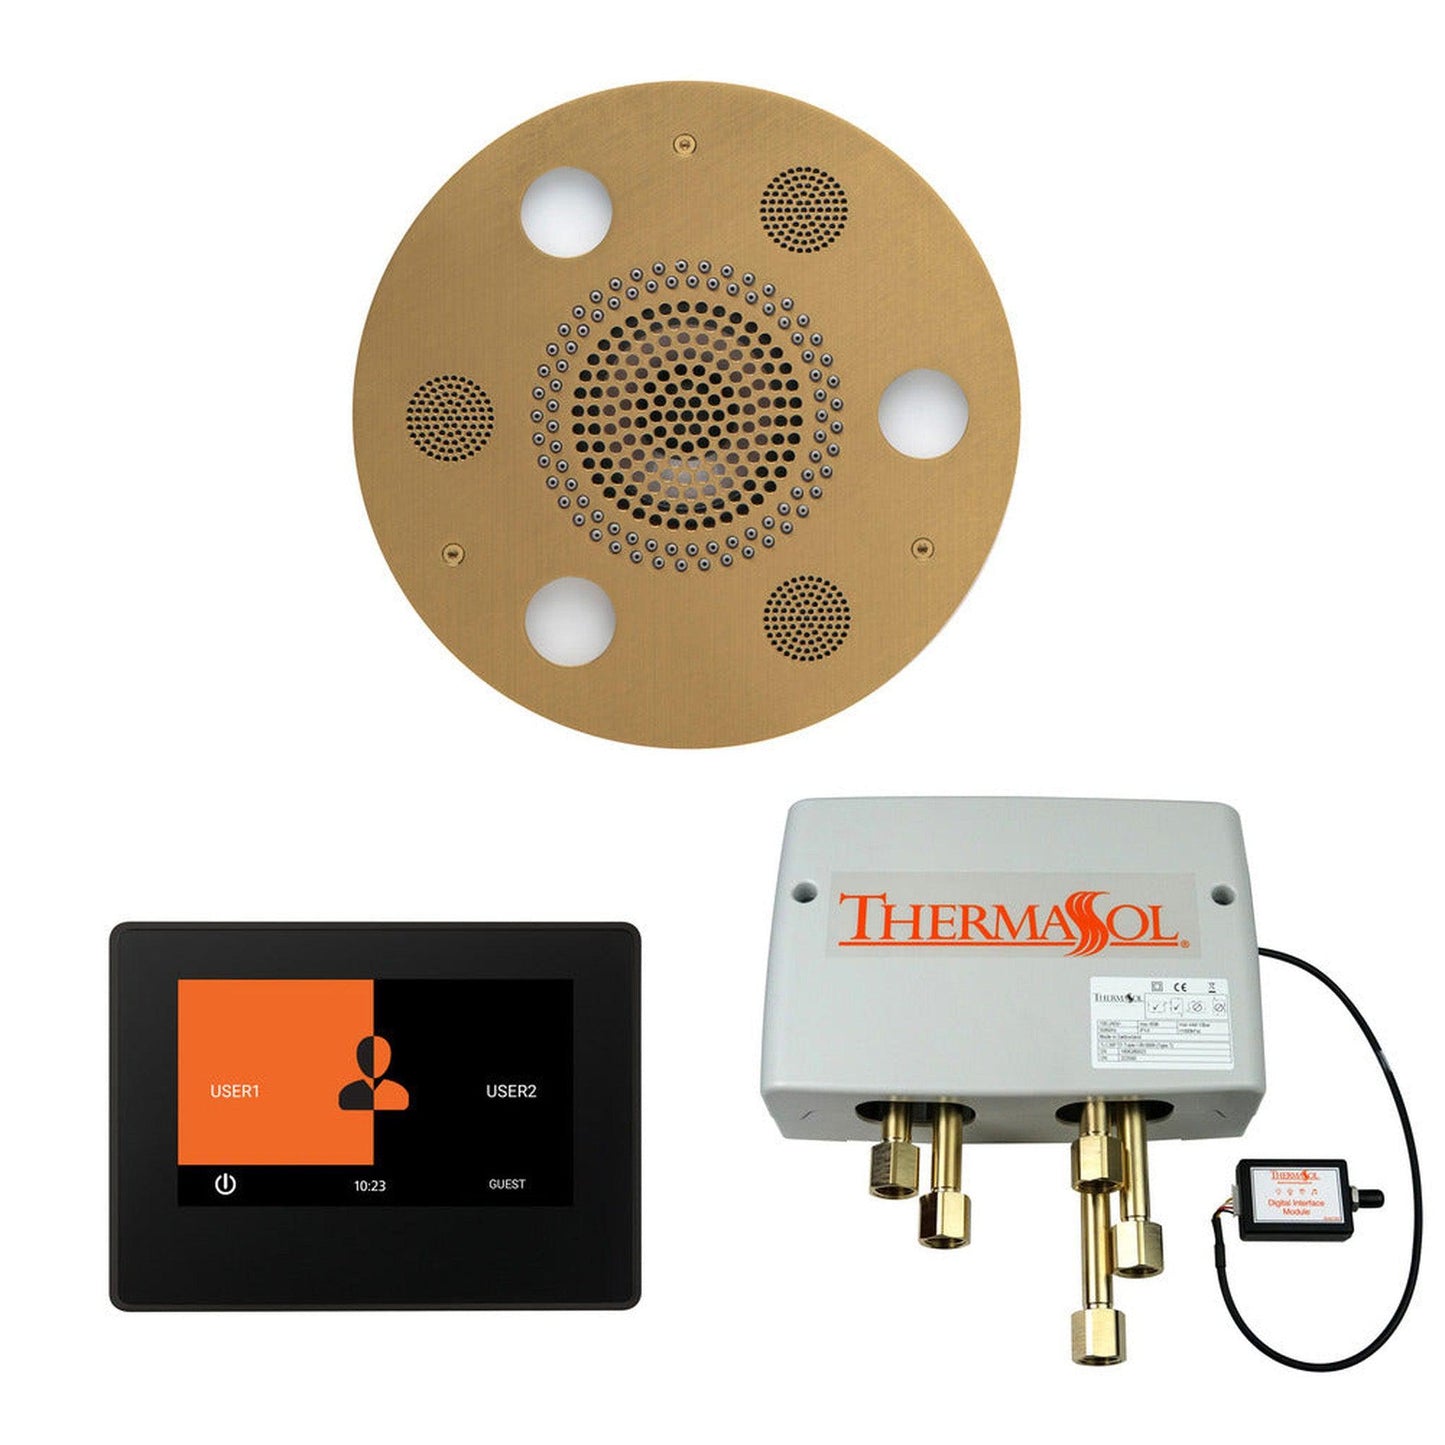 ThermaSol The Wellness Satin Brass Finish Serenity Advancedd Round Shower Package with 7" ThermaTouch